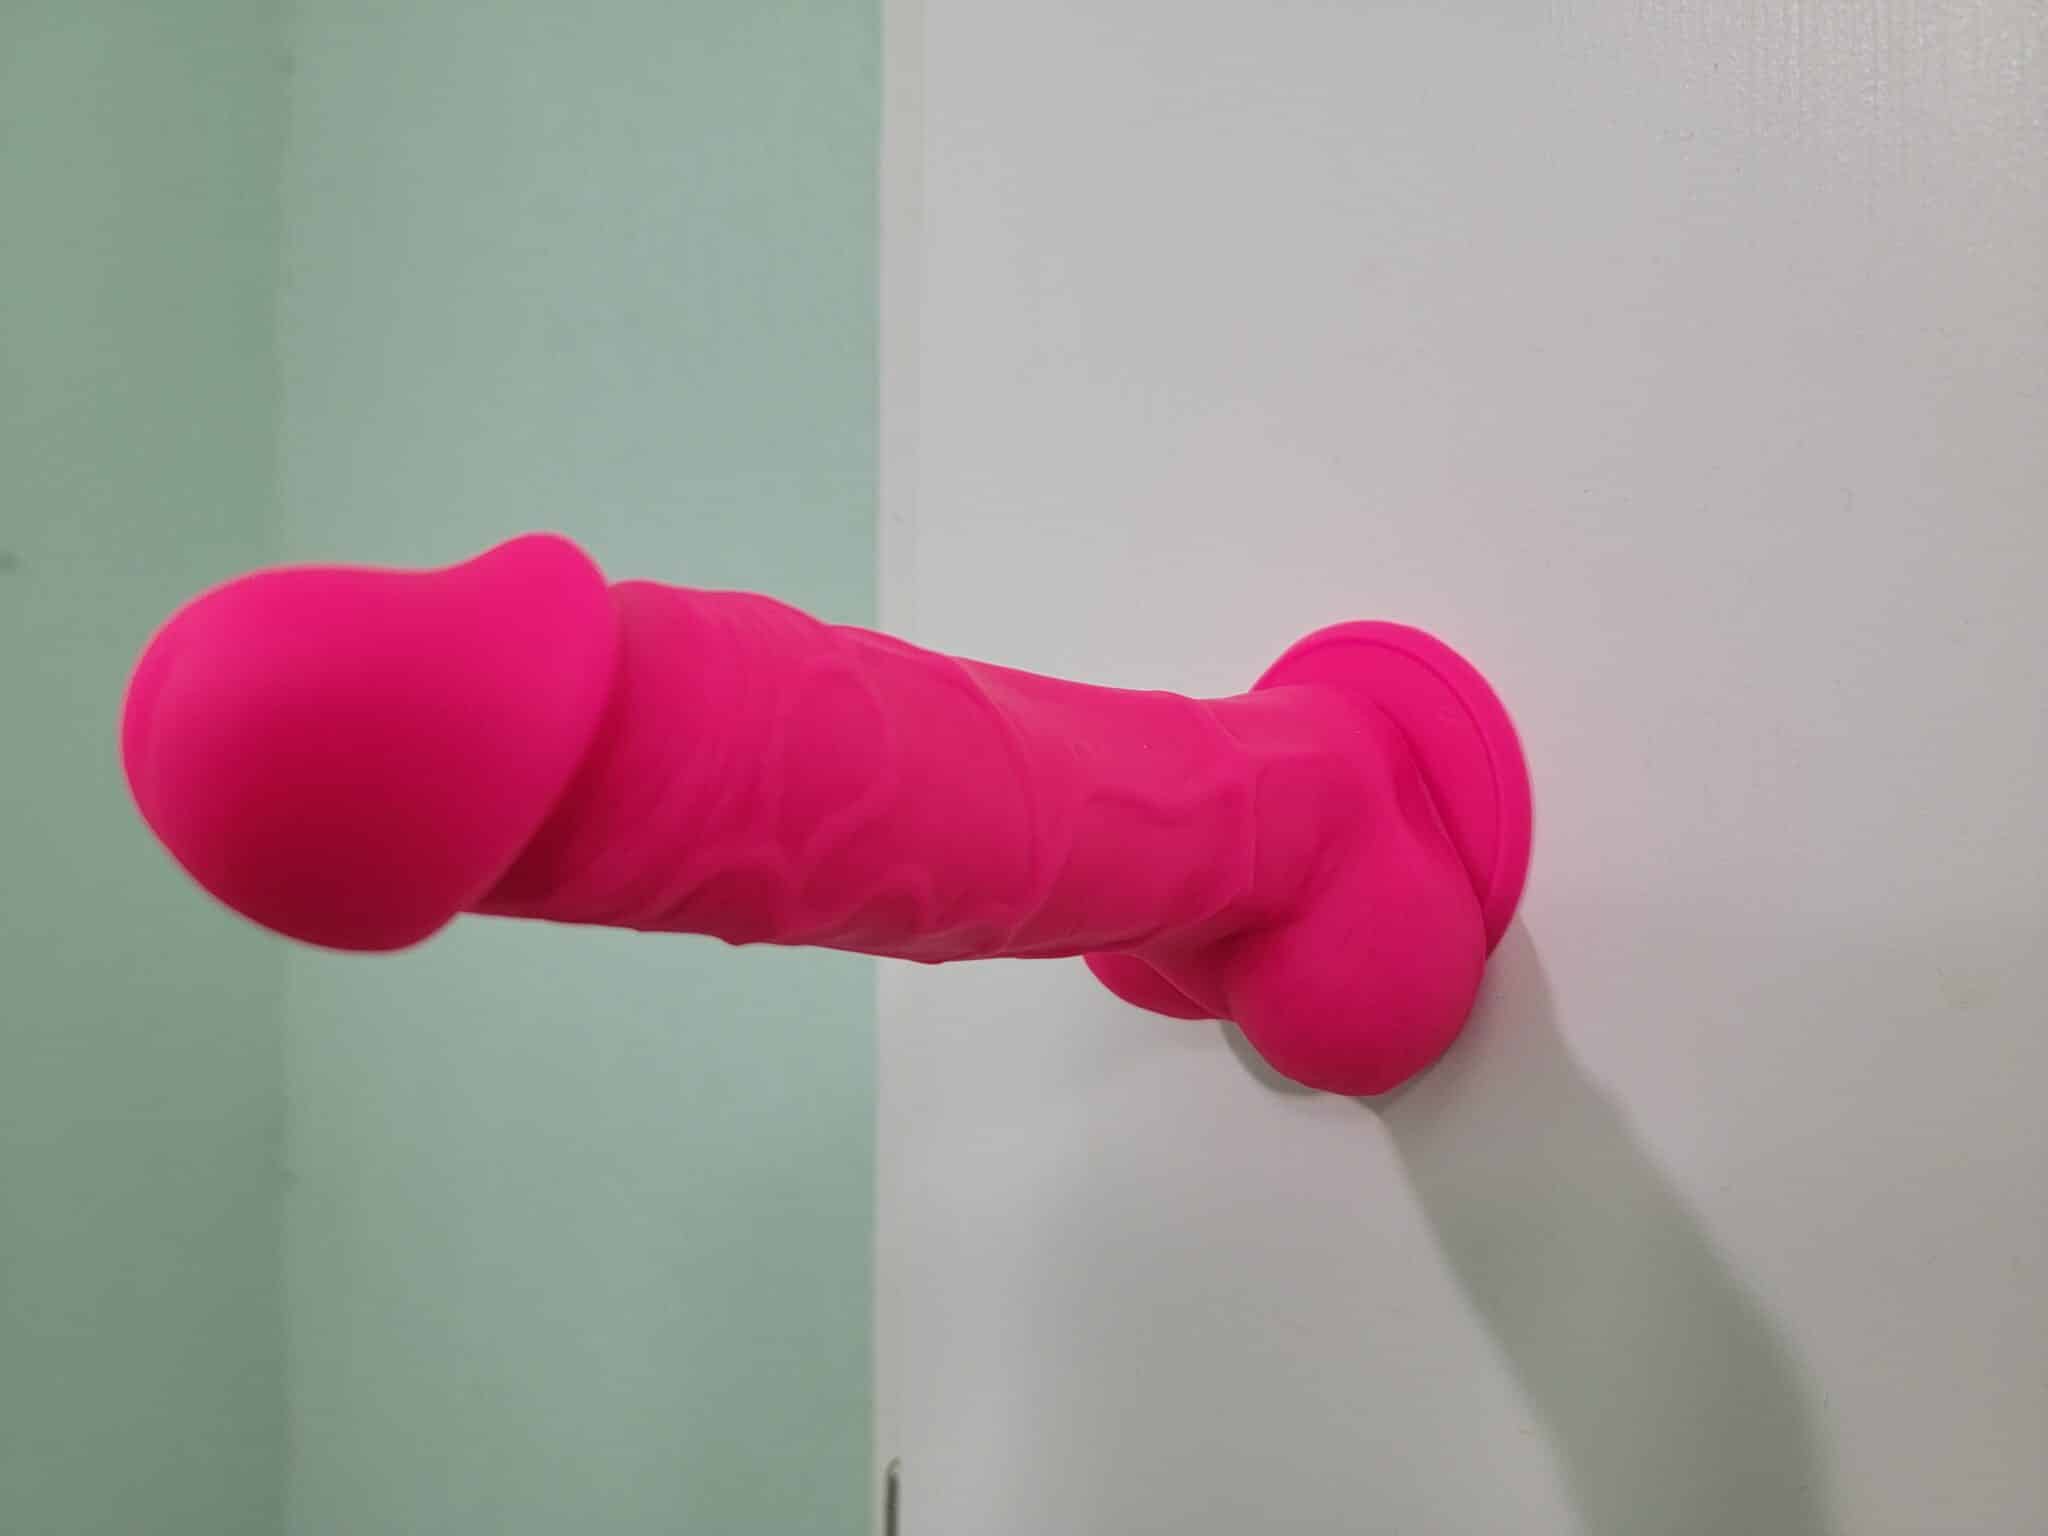 Colours Pleasures 5 Inch Dildo A Closer Look at the Colours Pleasures 5 Inch Dildo’s Ease of Use